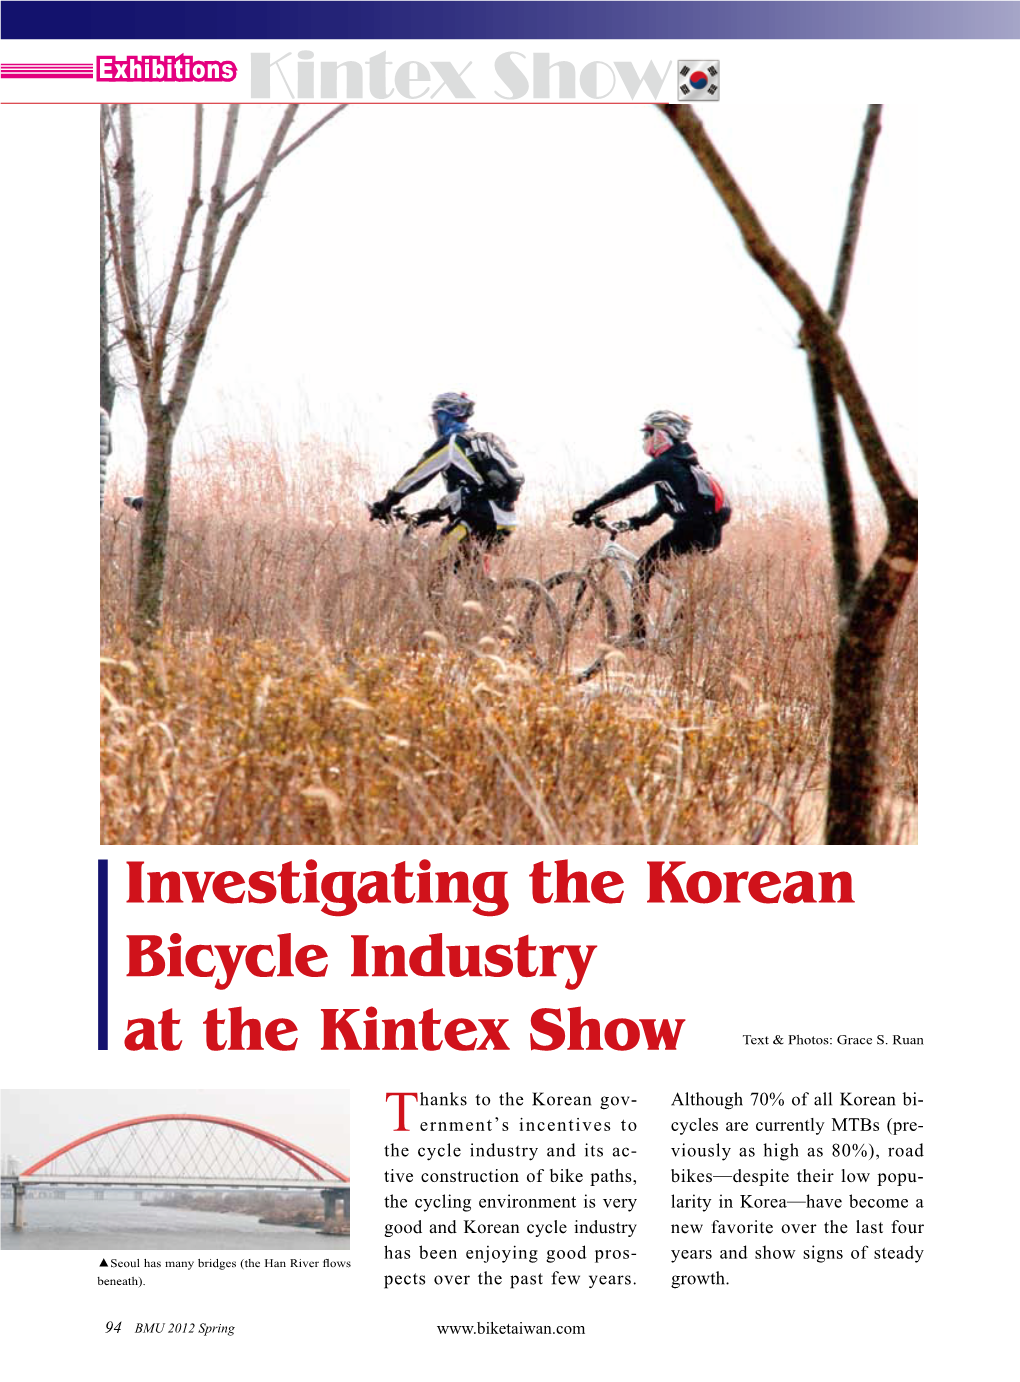 Investigating the Korean Bicycle Industry at the Kintex Show